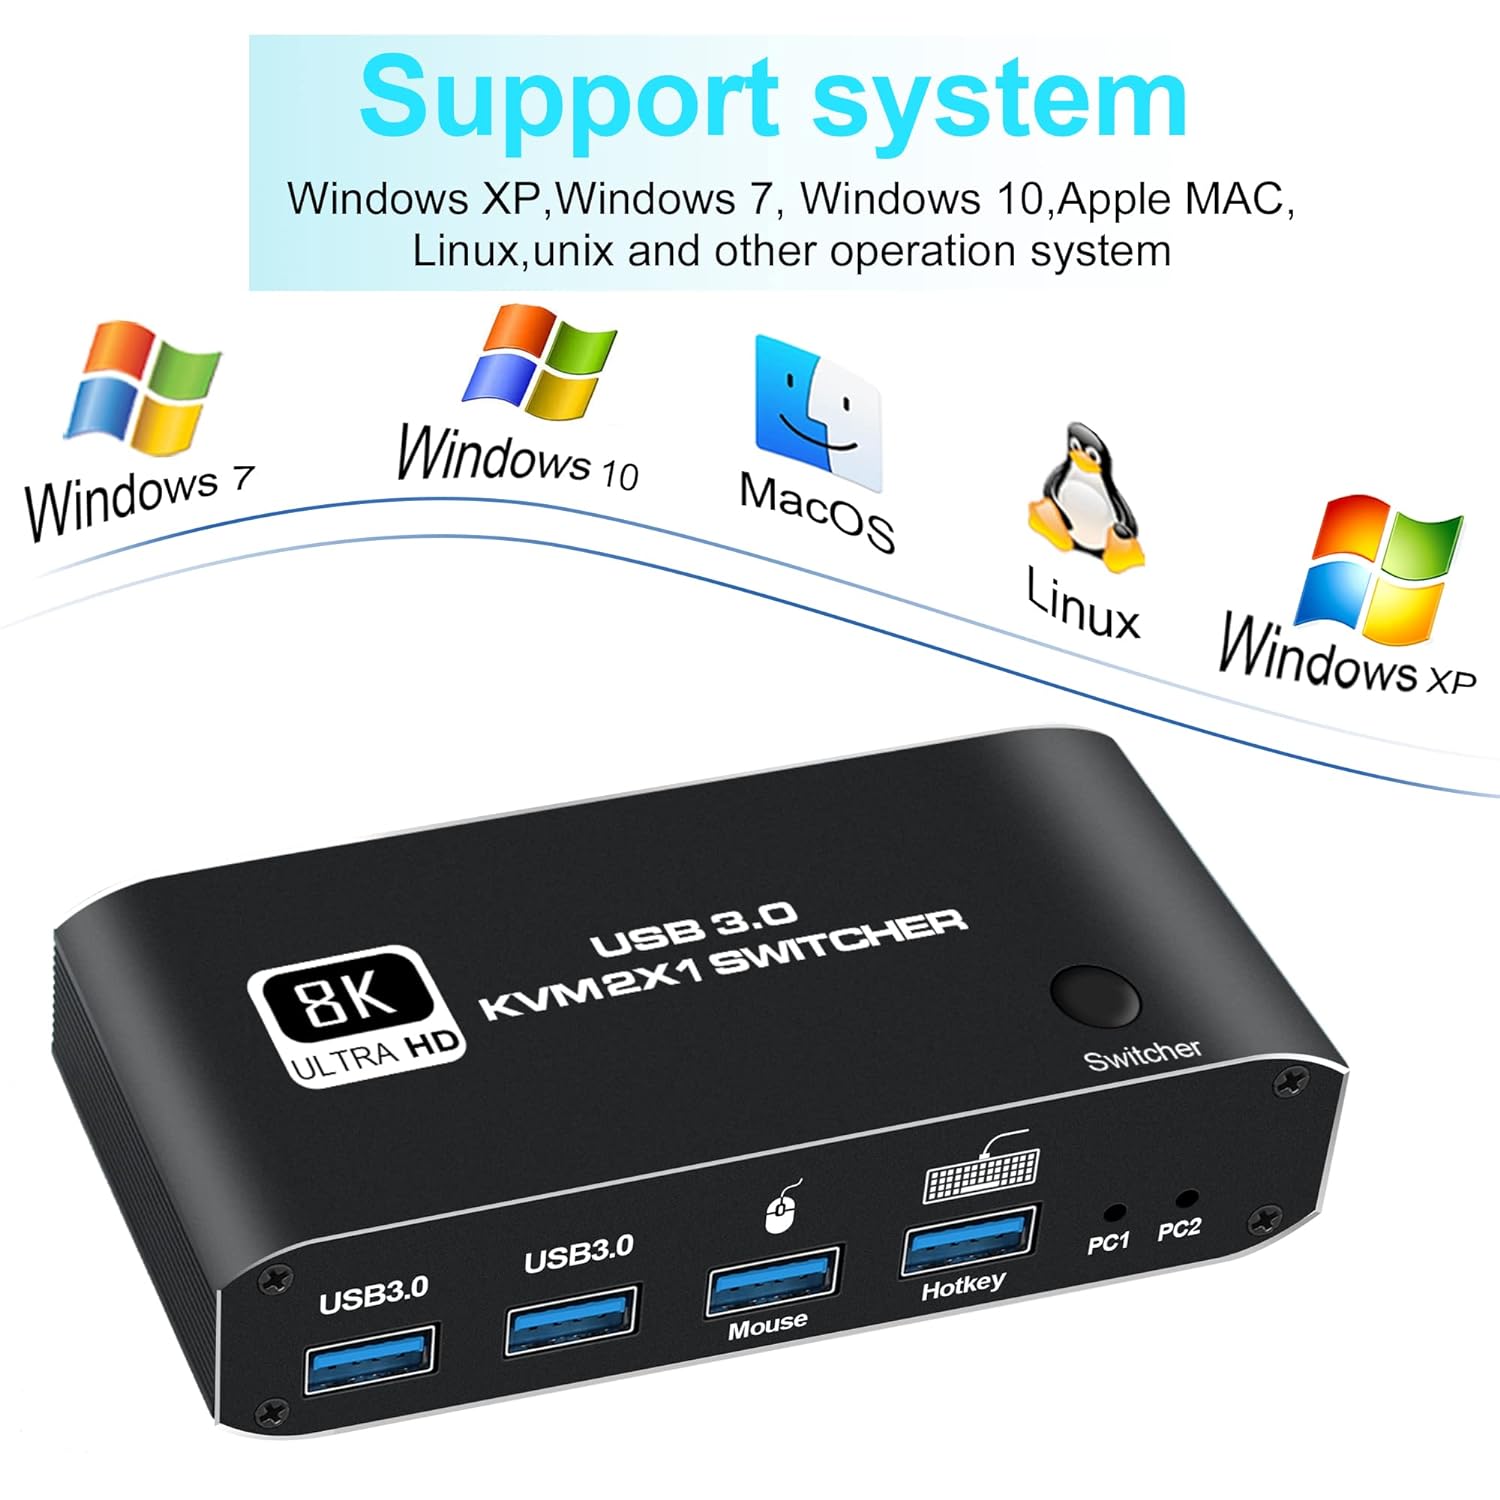 Compact size of NEWCARE 8K USB Switch 2x1 HDMI KVM Switch